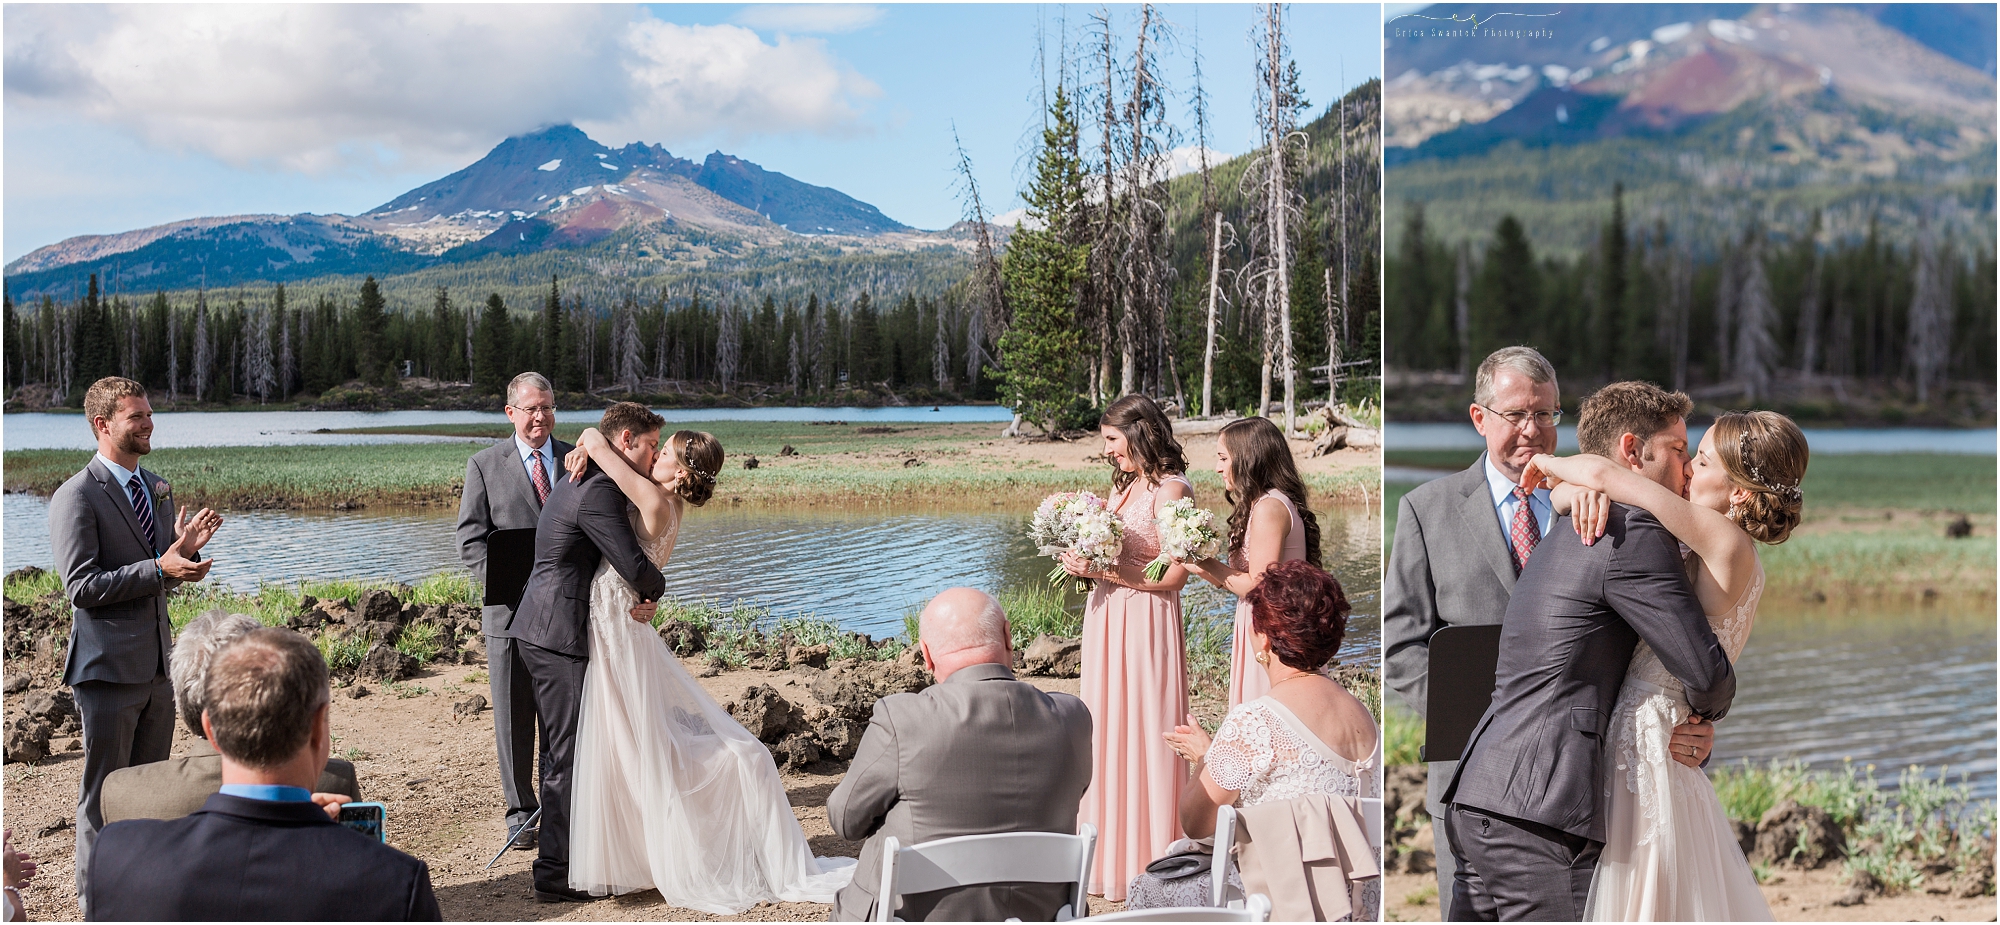 Make your wedding ceremony kiss last for the best photo! 